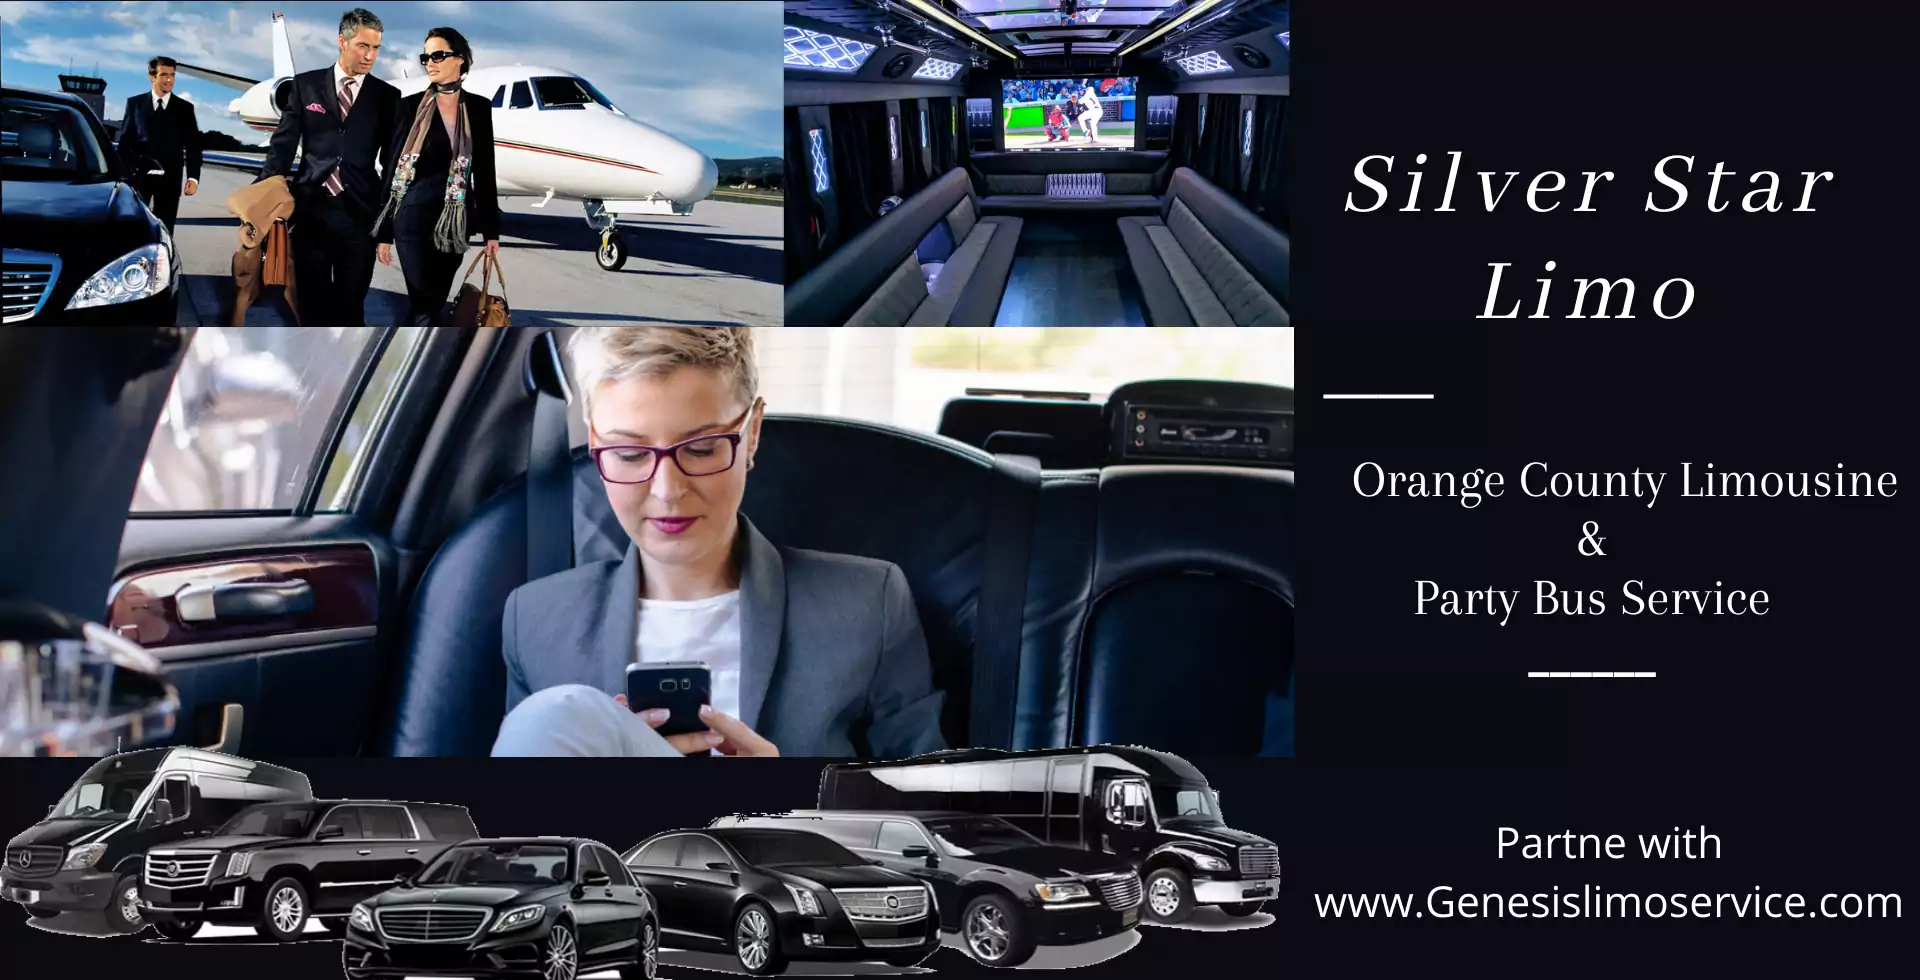 Orange County Limo & Party Bus Service